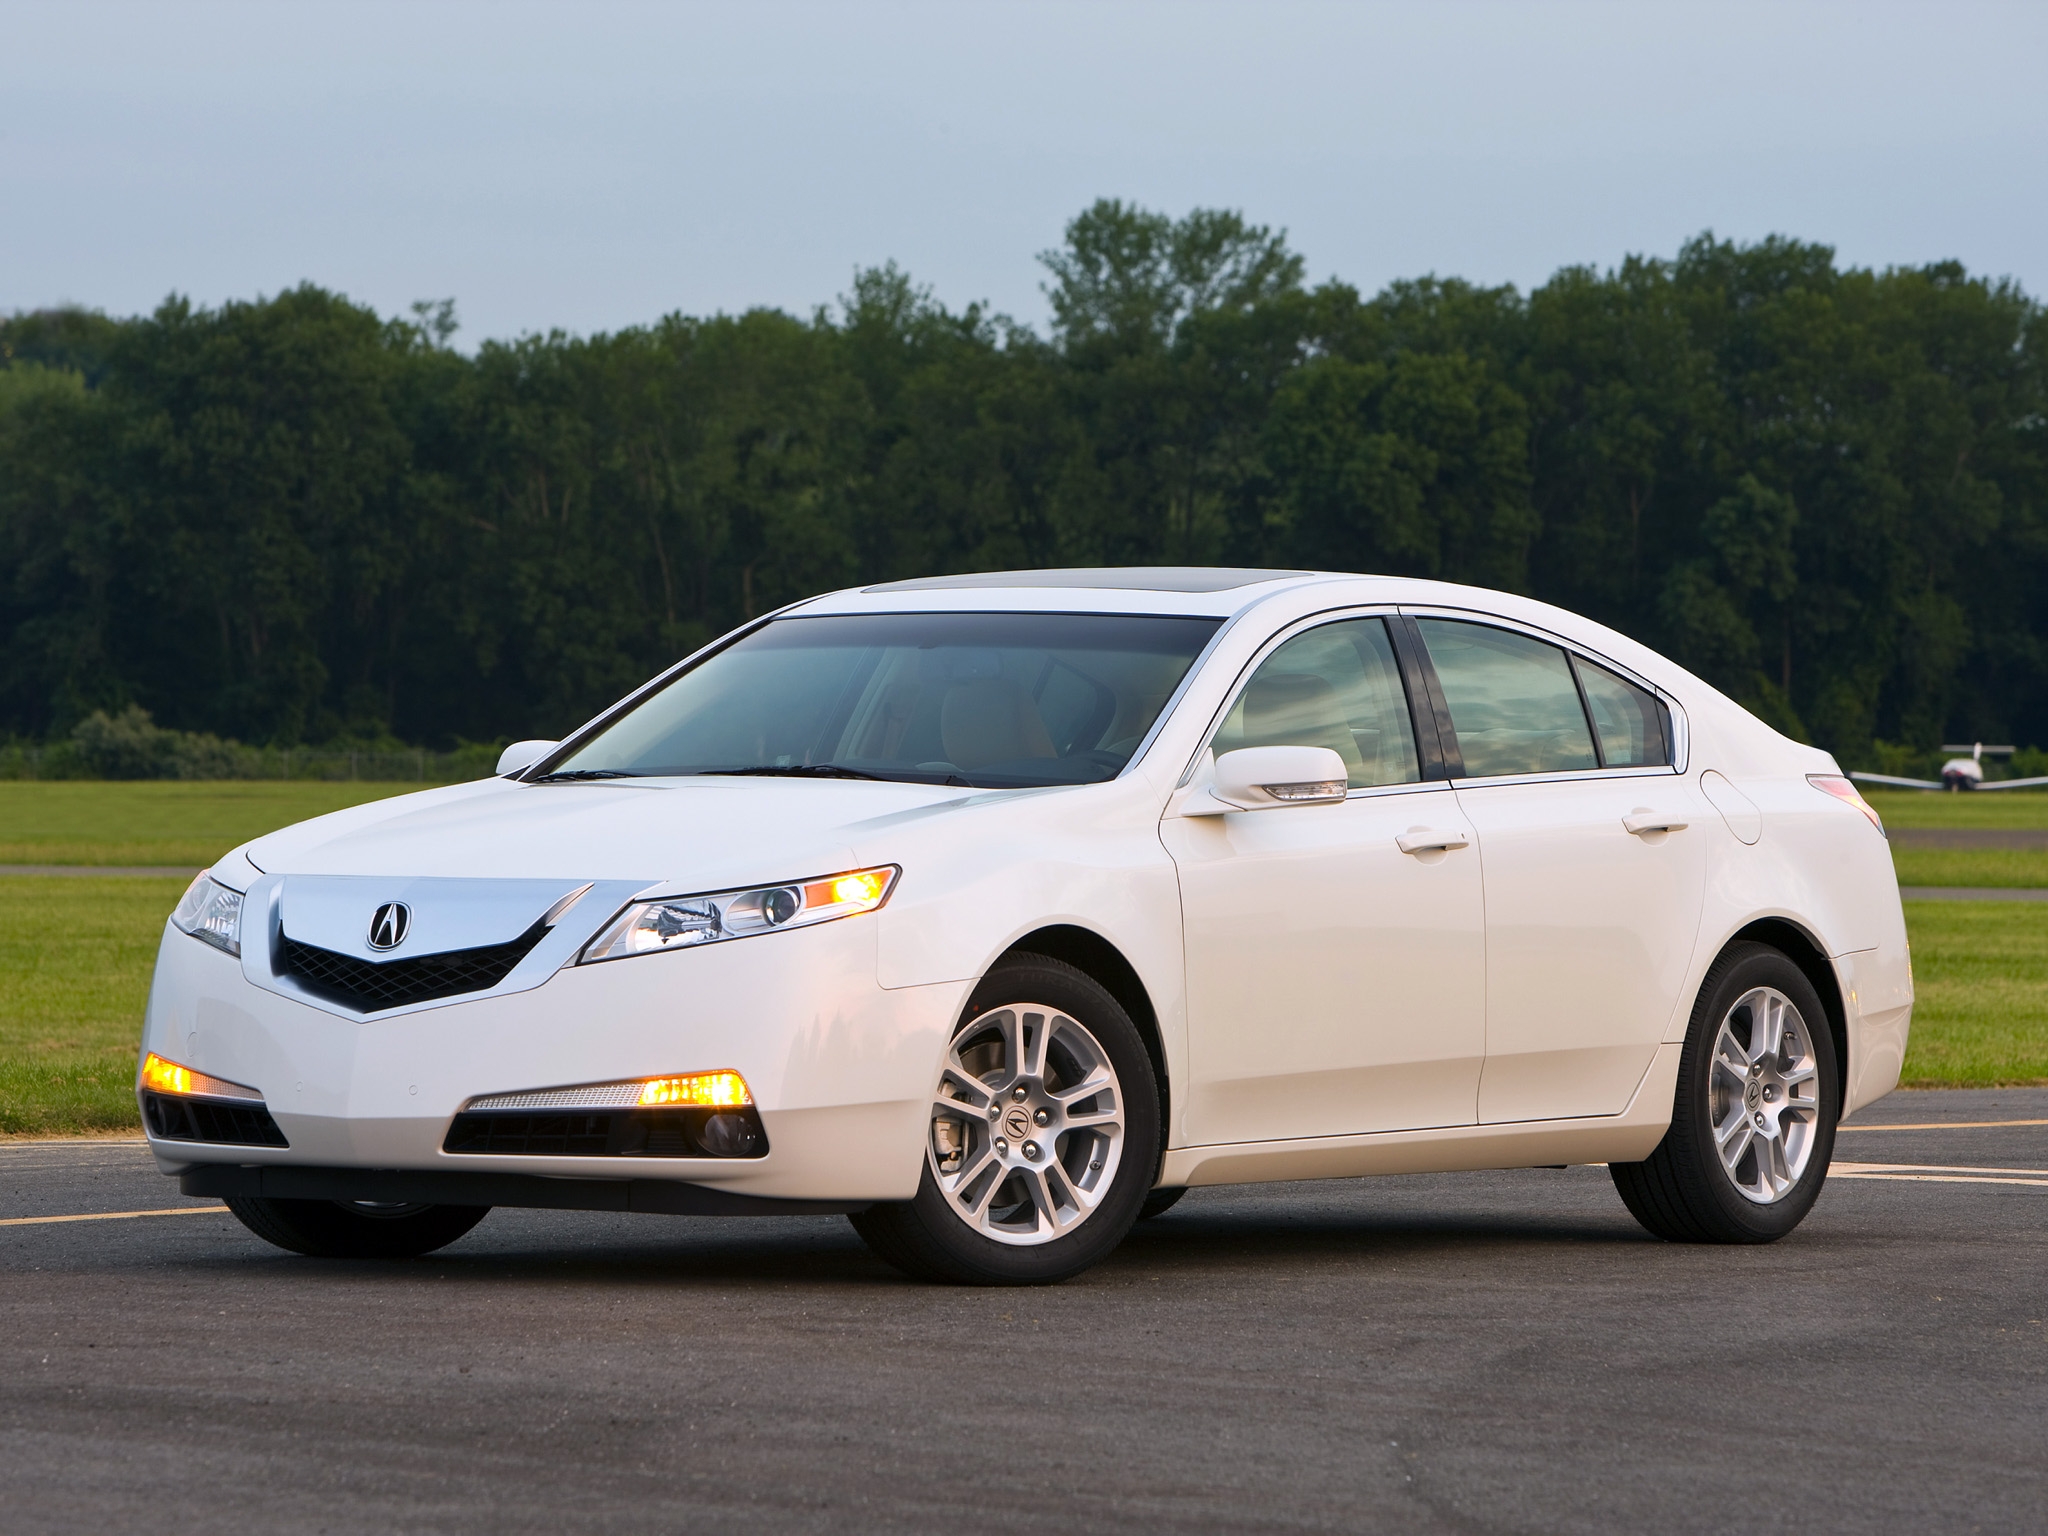 cars, auto, nature, trees, grass, acura, white, side view, style, akura, 2008, tl 32K